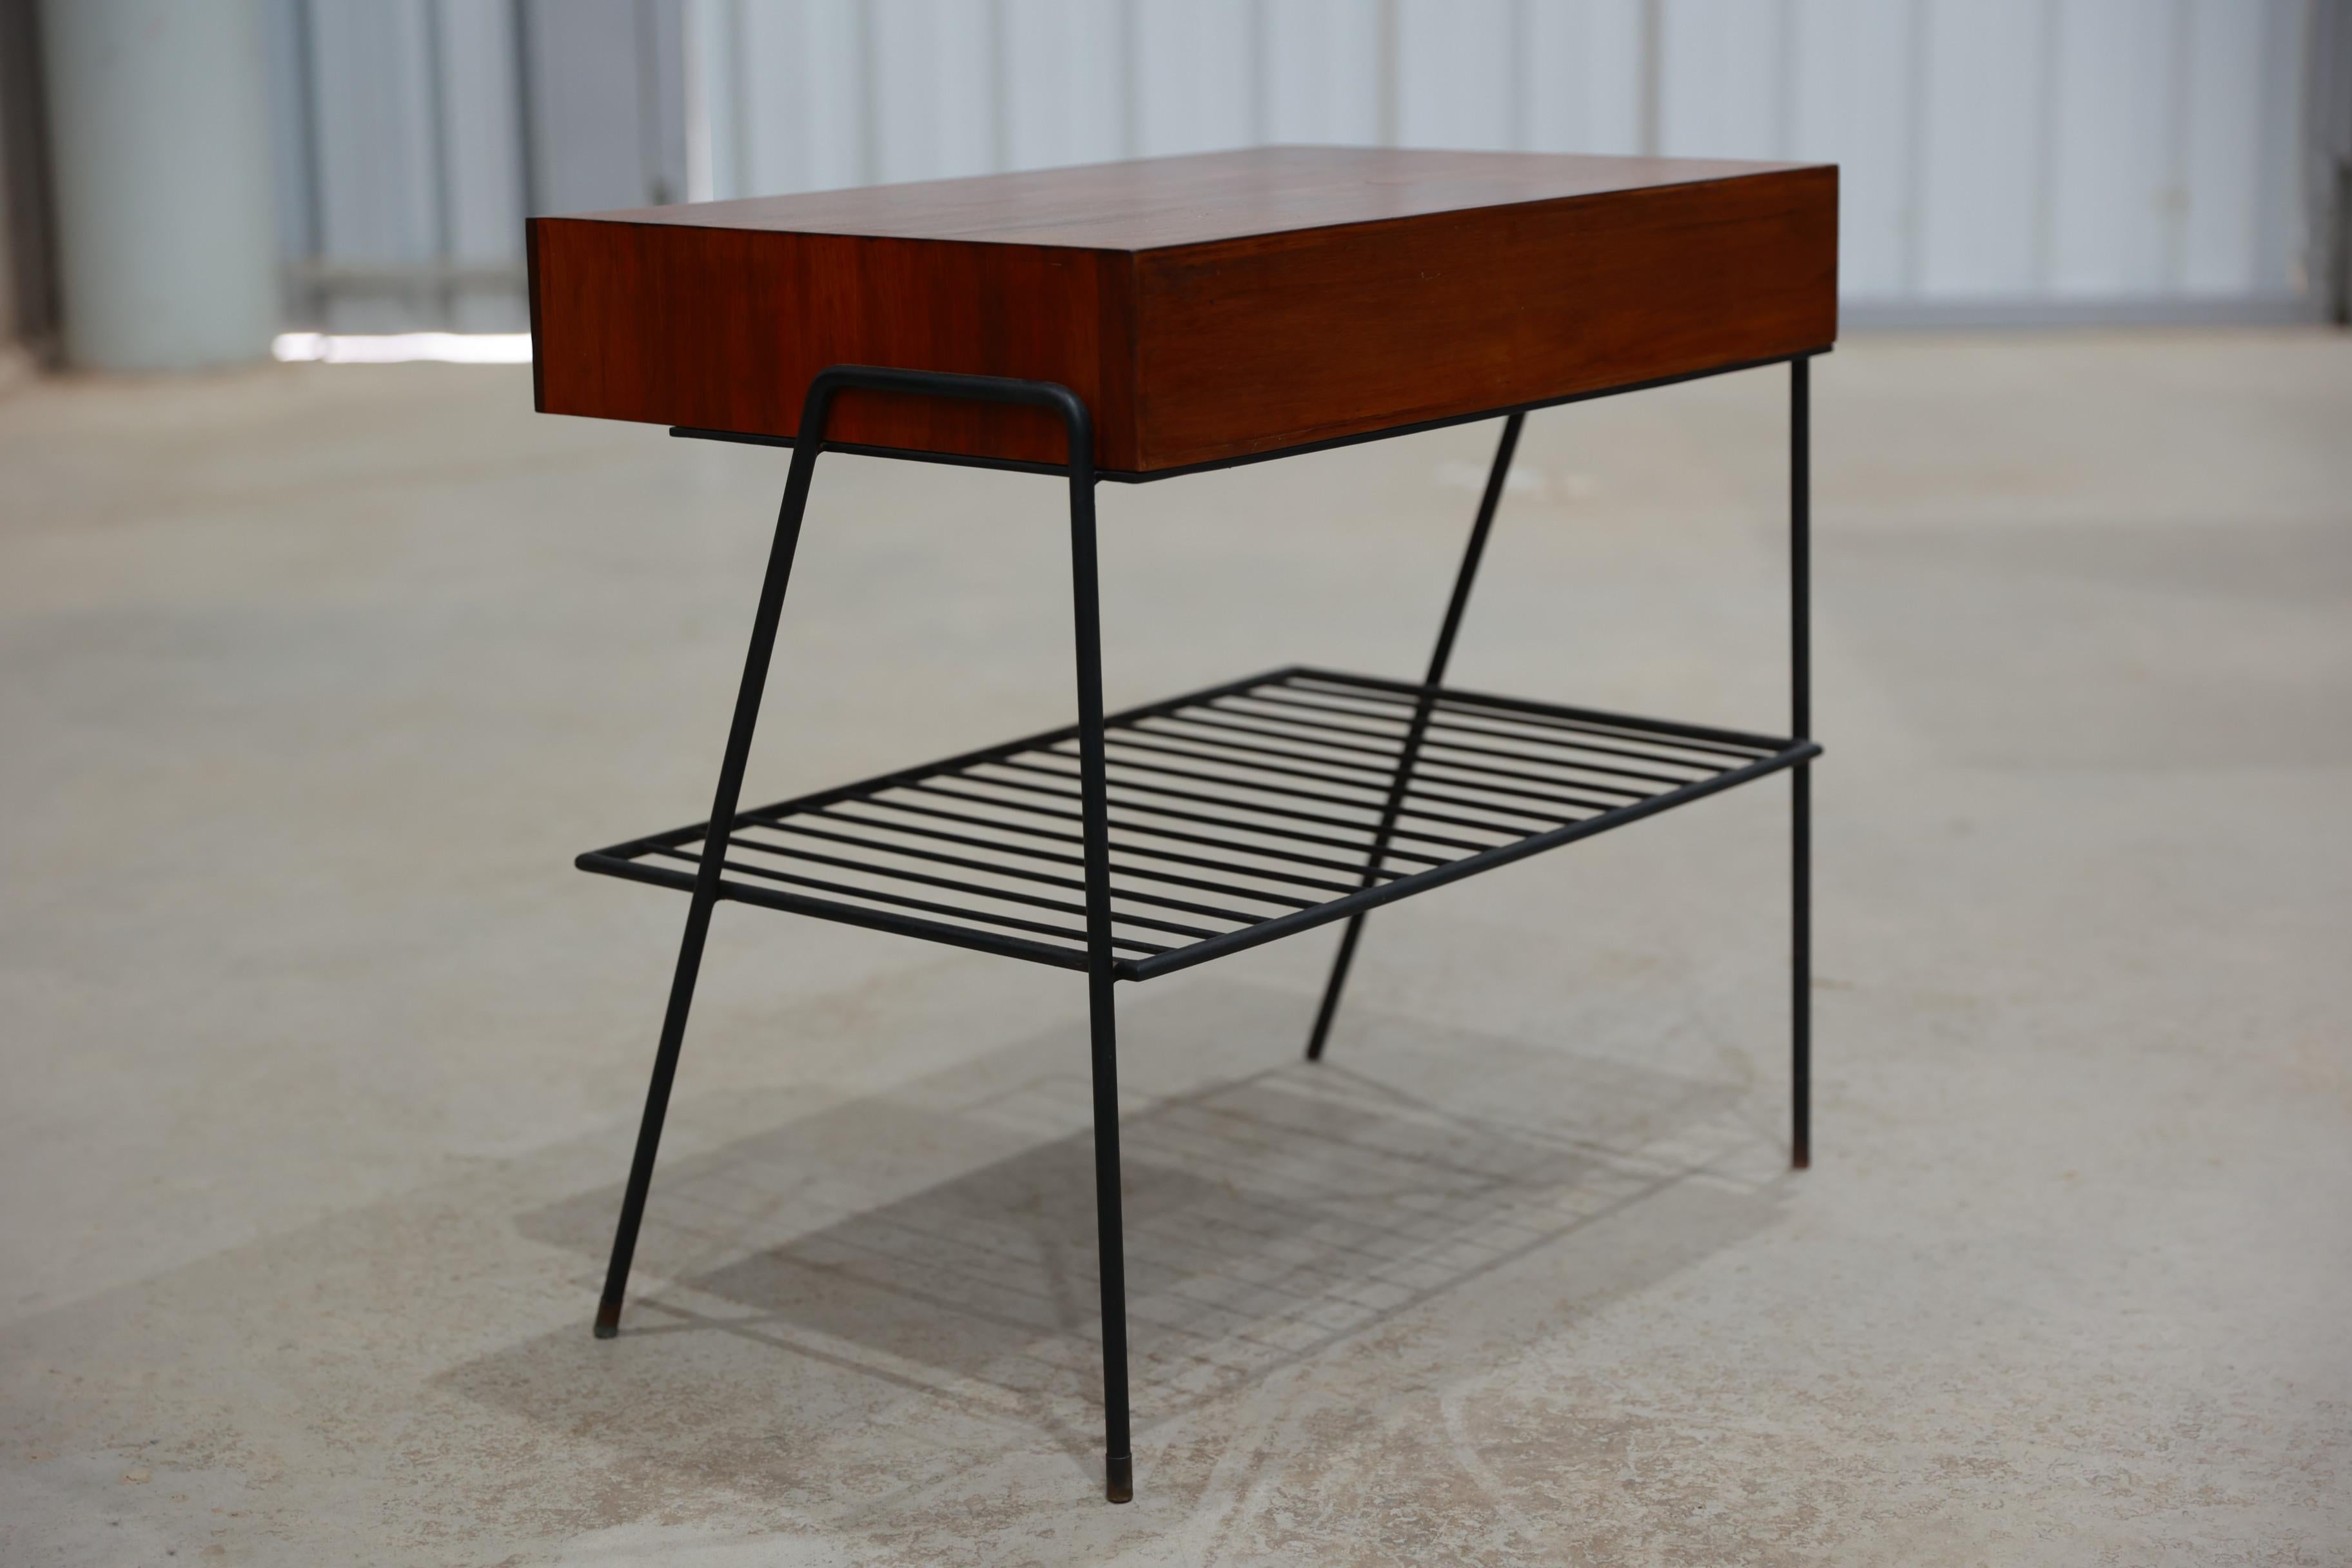 Metalwork Brazilian Modern Side table in Hardwood and Metal, Unknown, c. 1950 For Sale